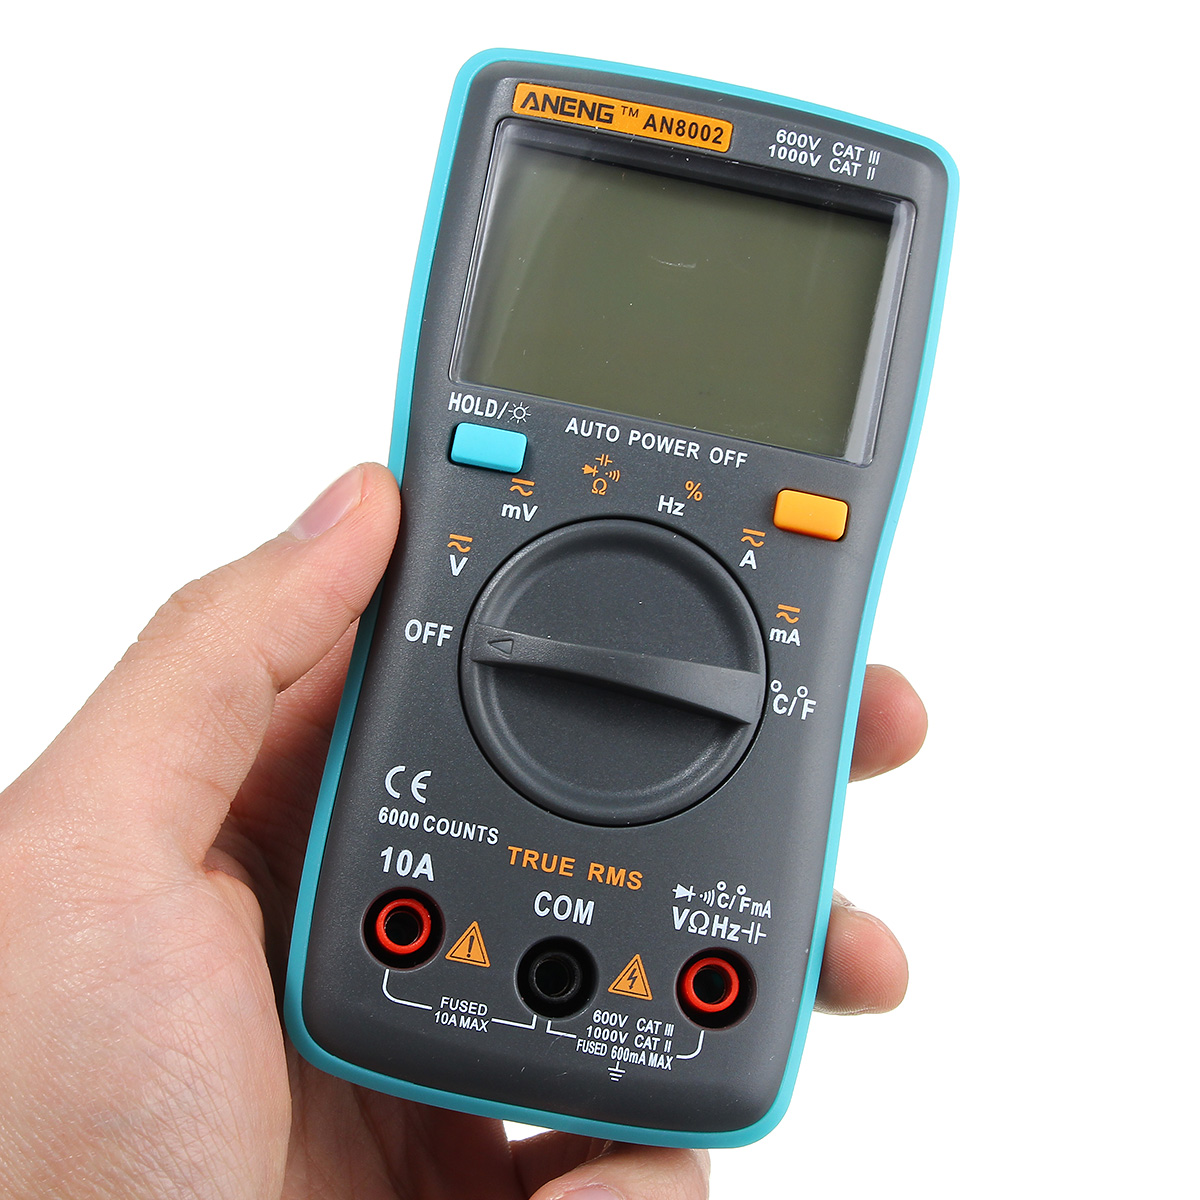 ANENG AN8002 Digital True RMS 6000 Counts Multimeter AC/DC Current Voltage Frequency Resistance Temperature Tester ℃/℉ 161